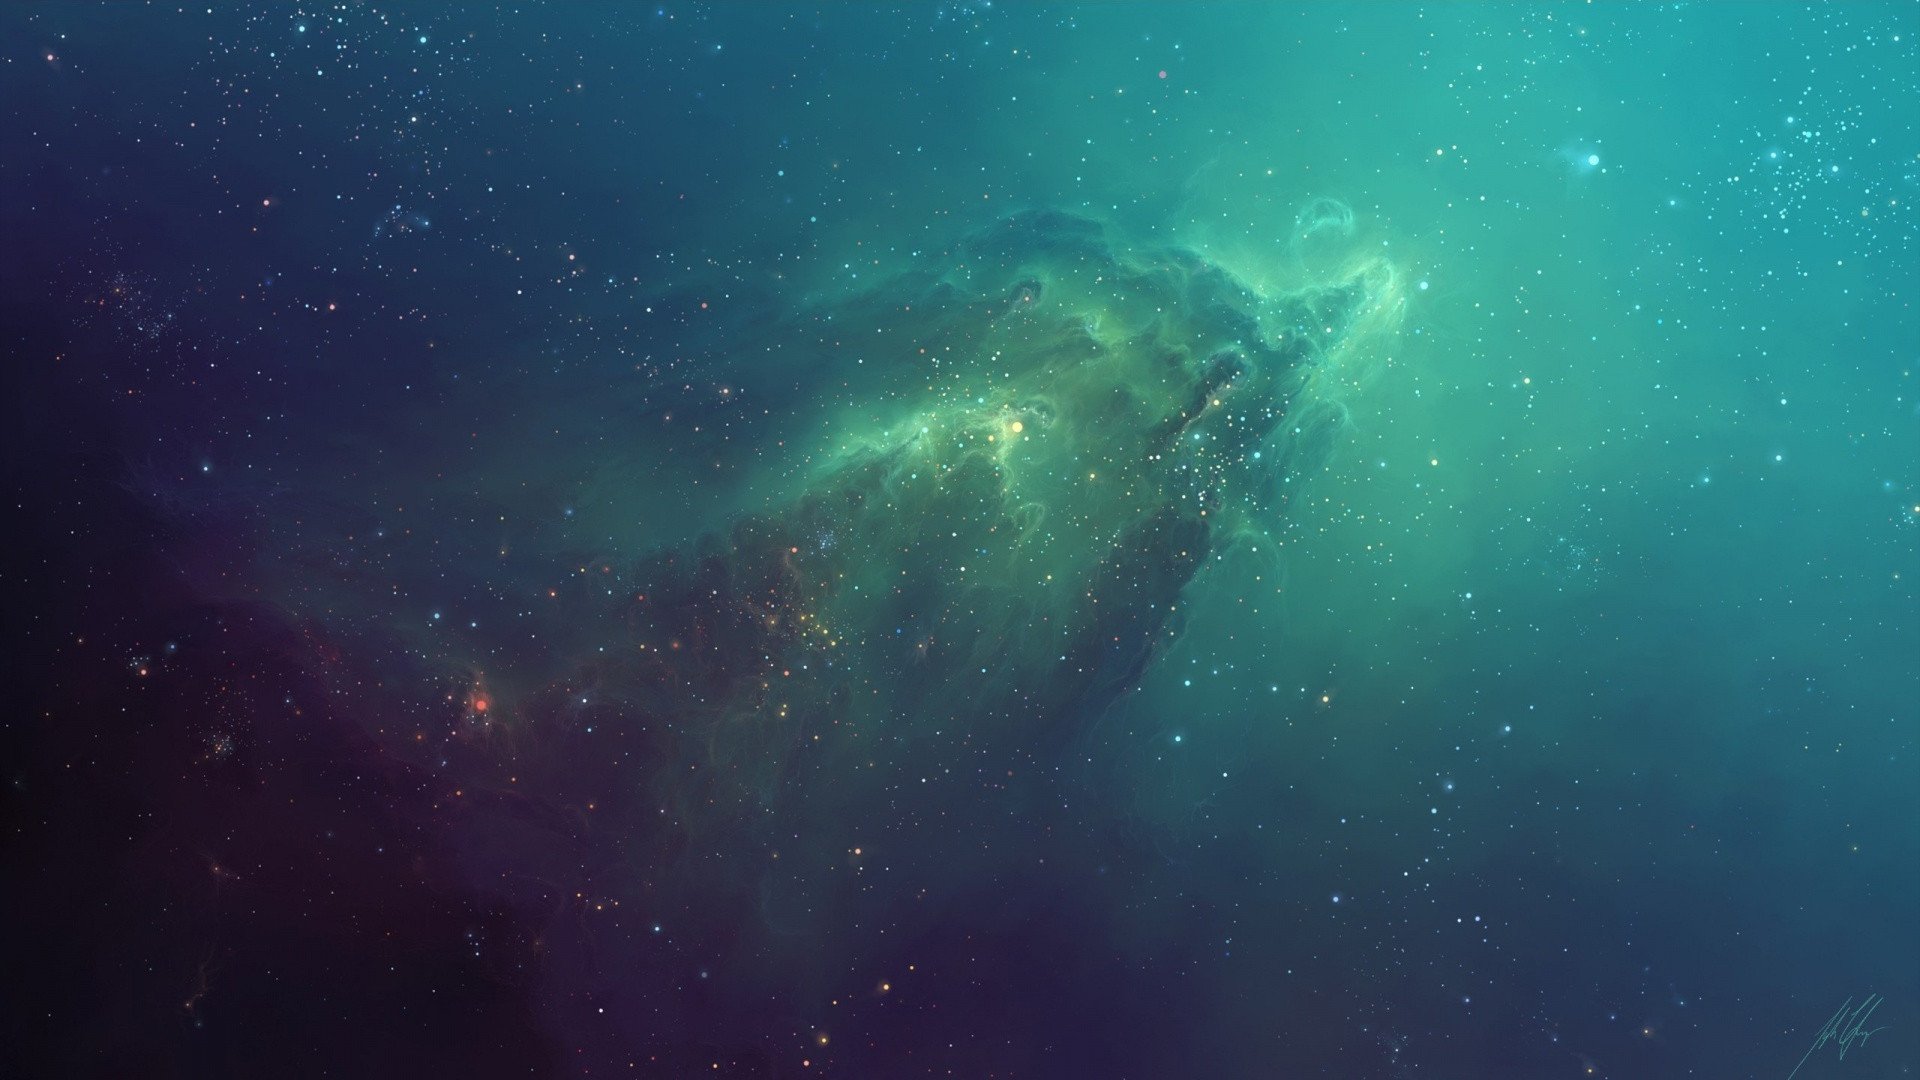 Anyone else a fan of the iOS 7 Nebula wallpaper I created a full res